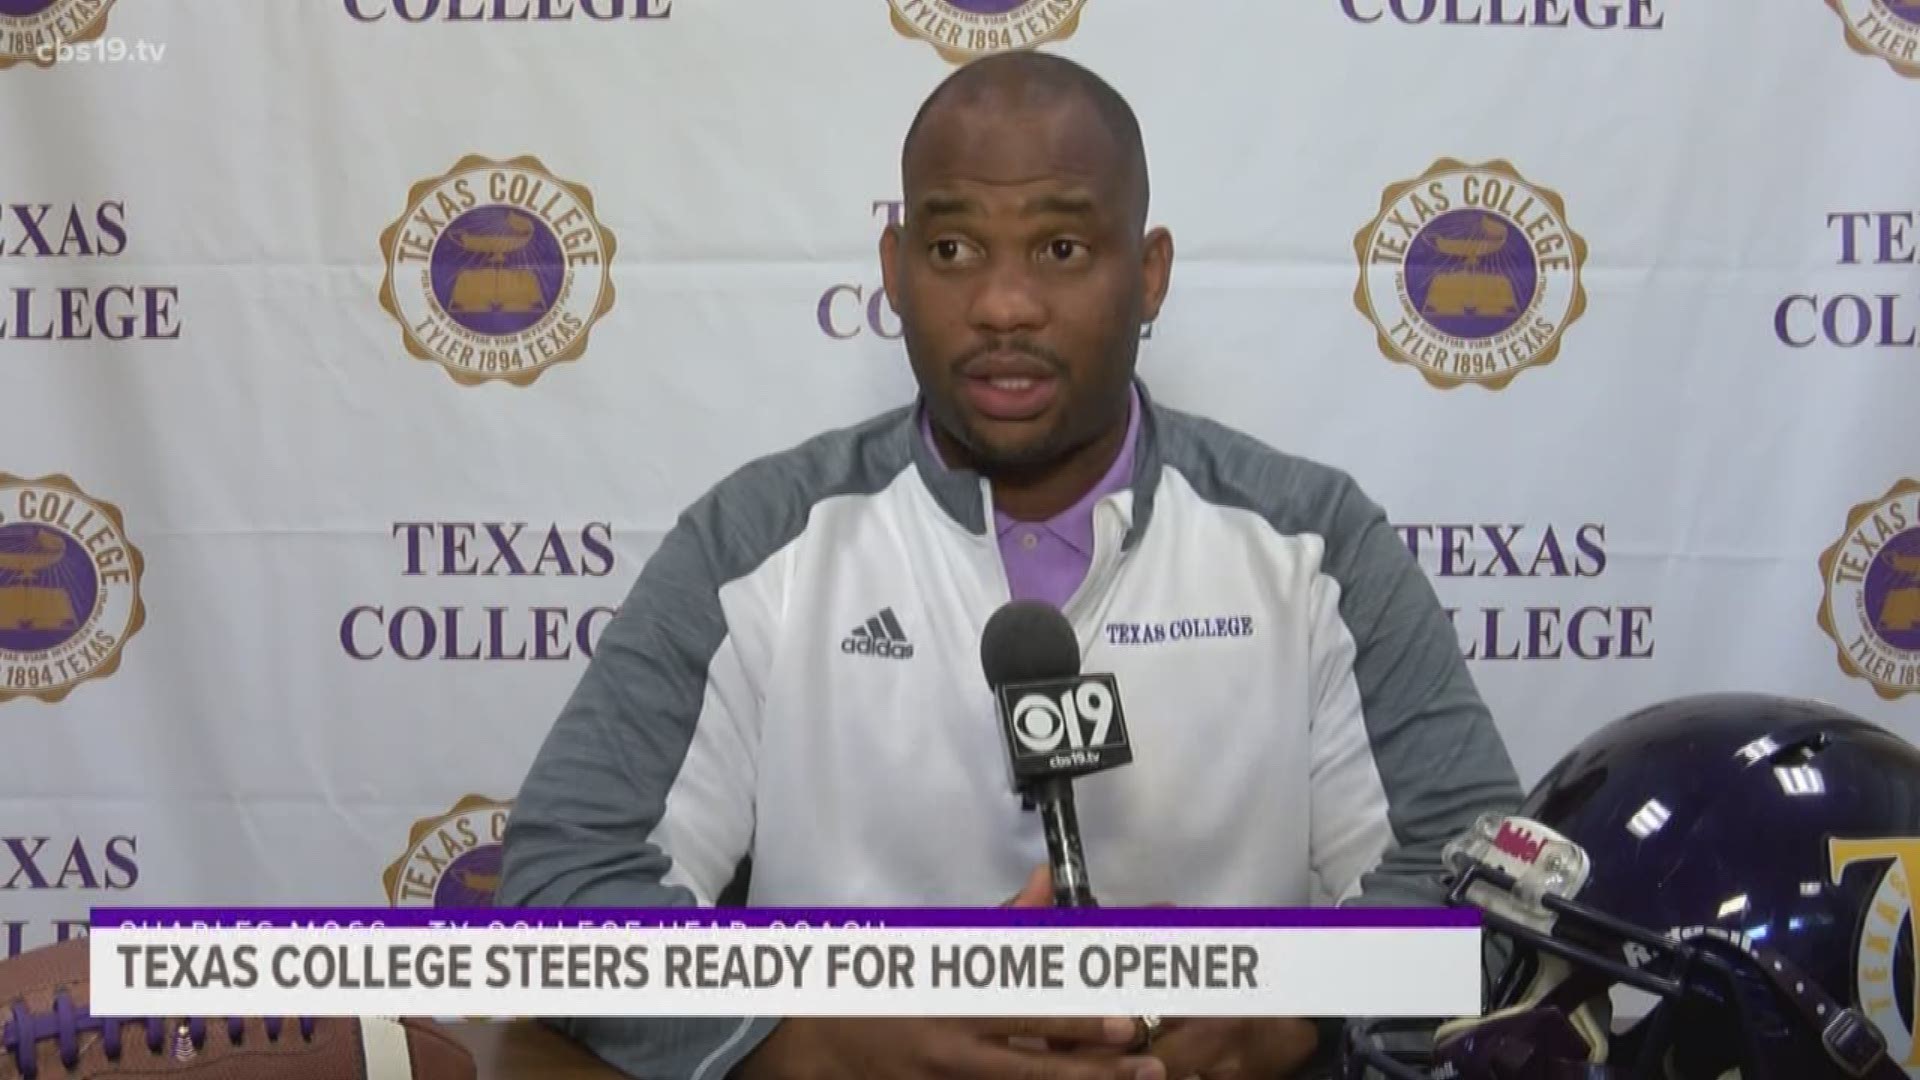 Texas College Steers ready for home opener